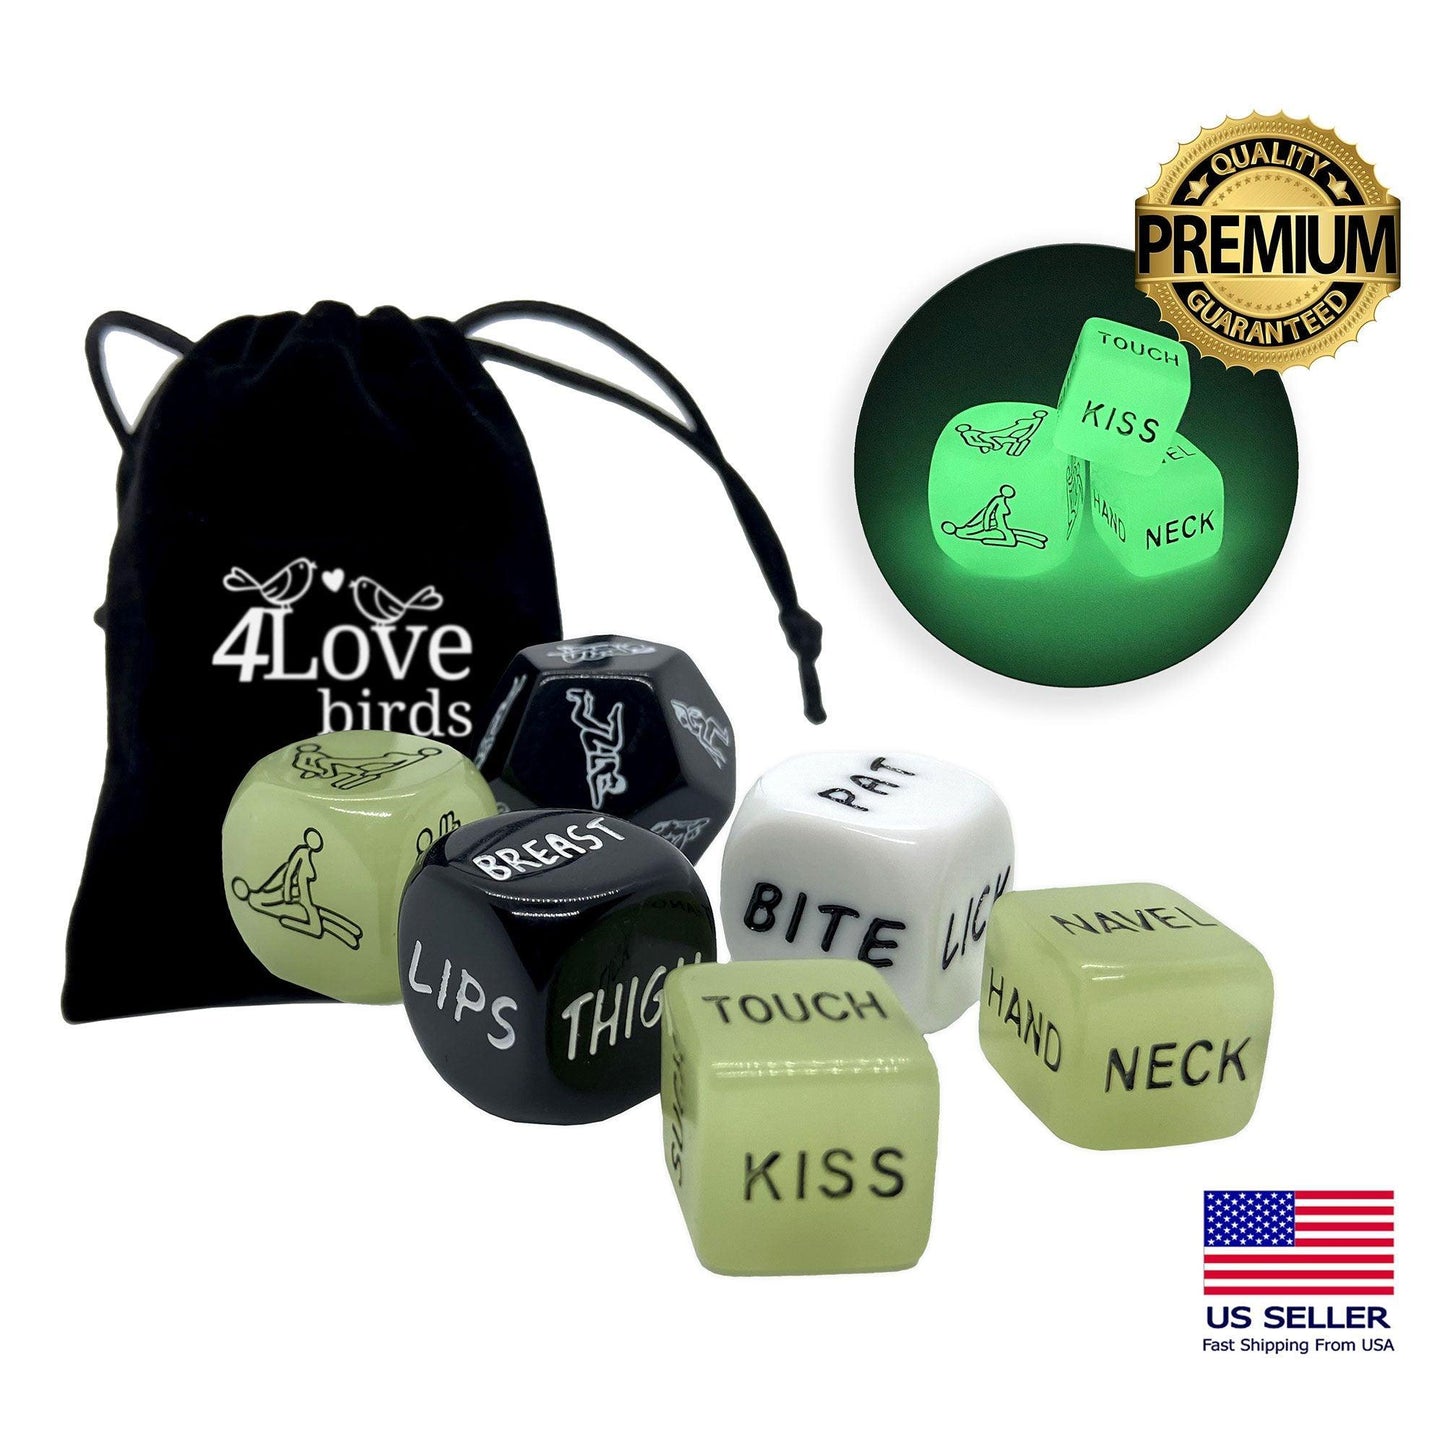 Sex Dice Game With Sex Positions - Glow in the Dark Bedroom Game, Fun Sex Toy For Wife and Husband (6 Dice) - 4Lovebirds